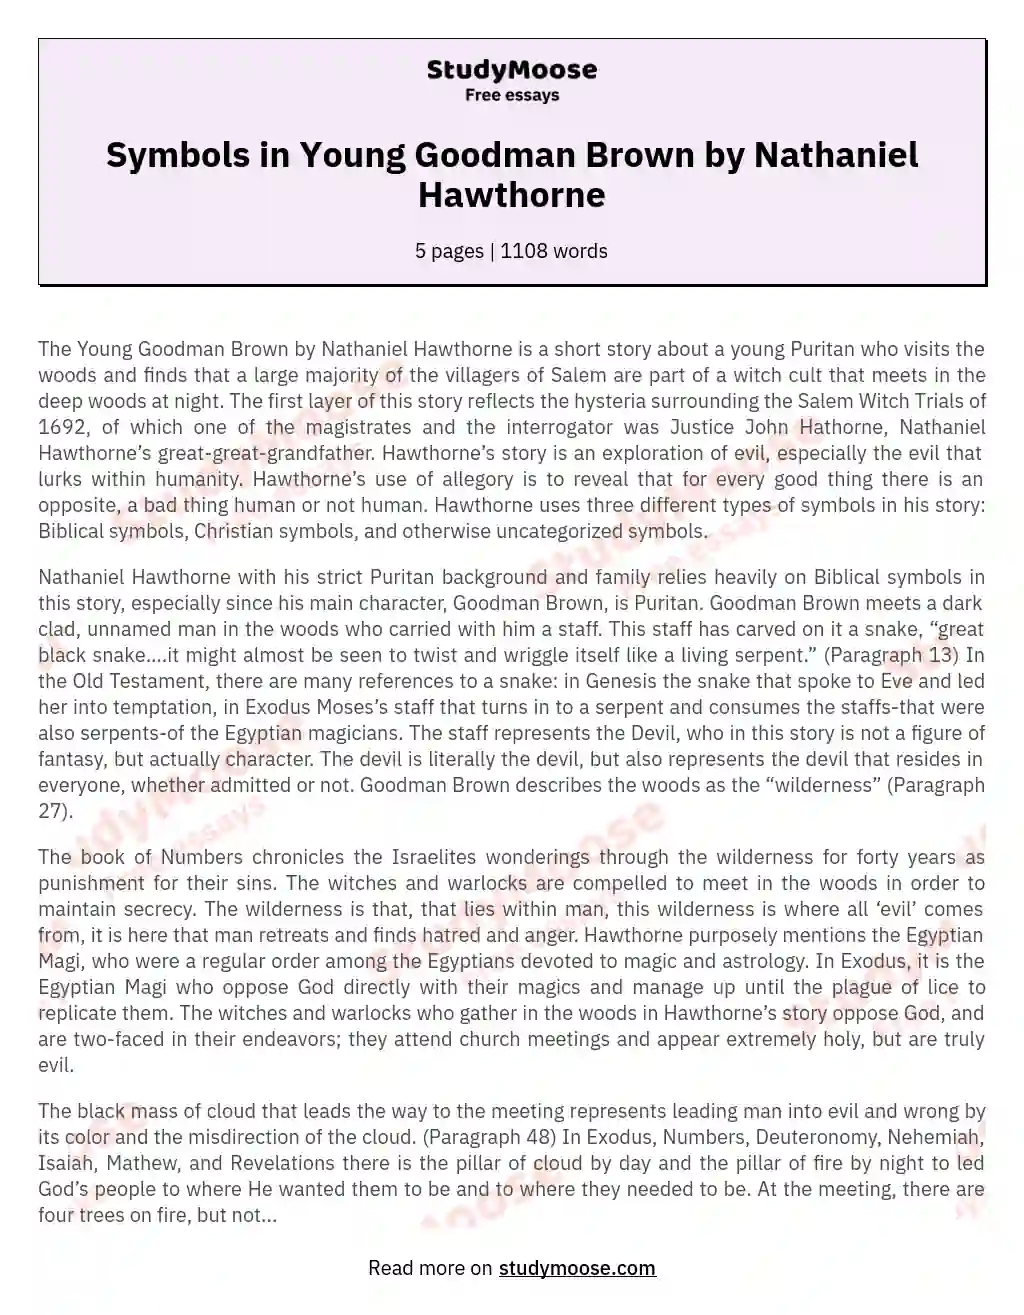 Symbols in Young Goodman Brown by Nathaniel Hawthorne